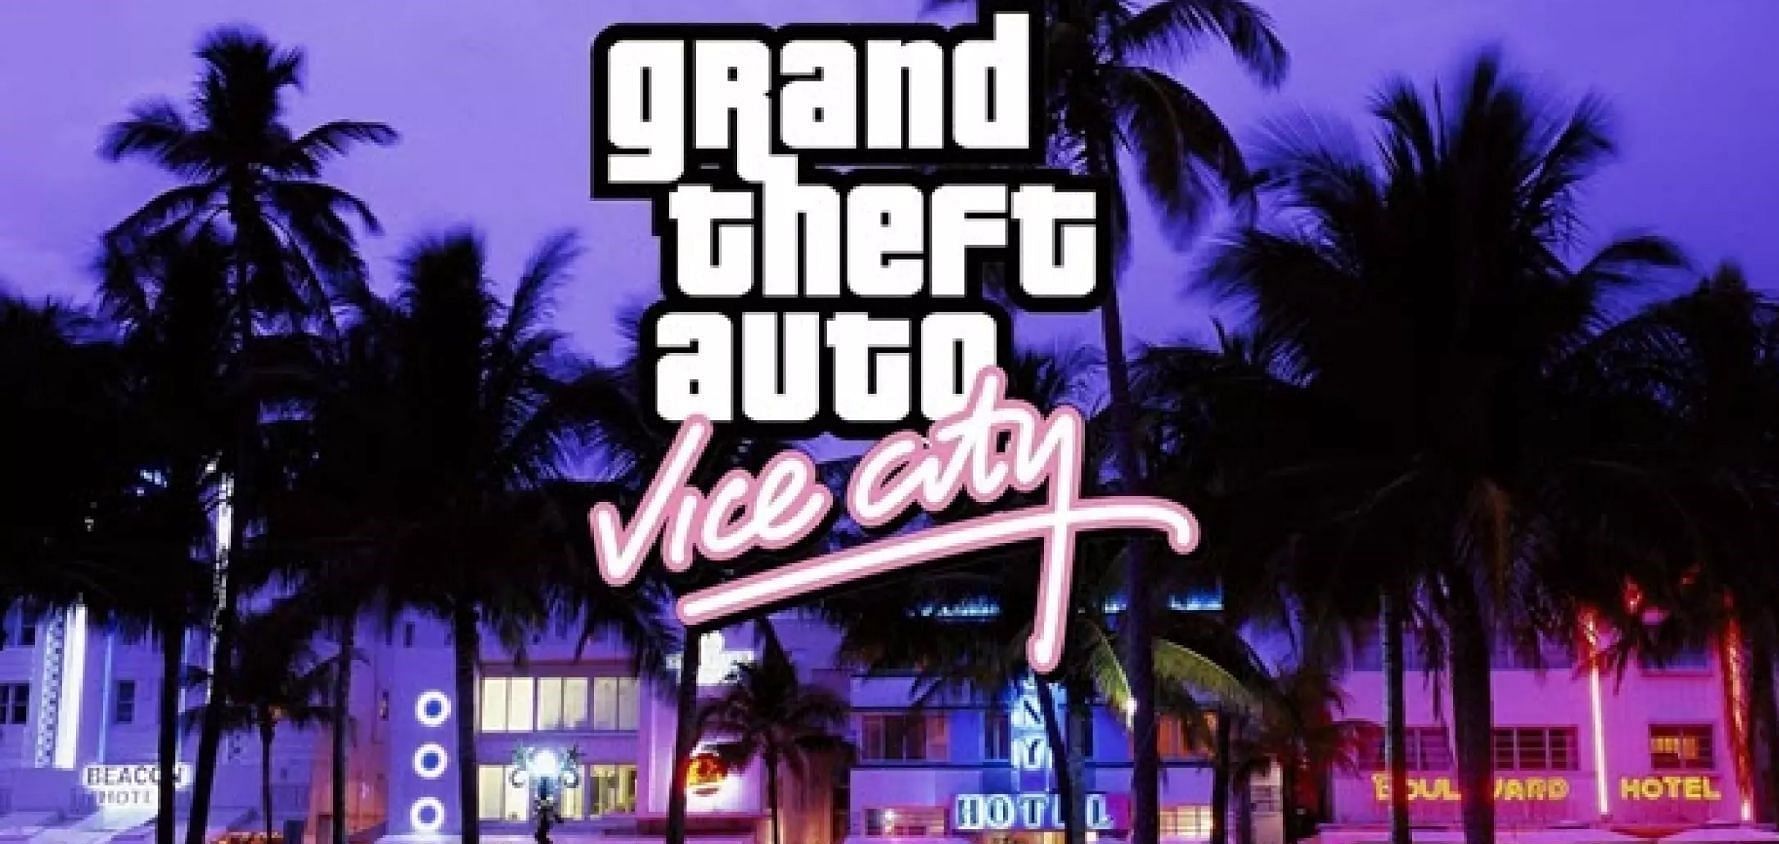 Vice City will receive some graphical upgrades in GTA: The Trilogy - Definitive Edition (Image via Sportskeeda)